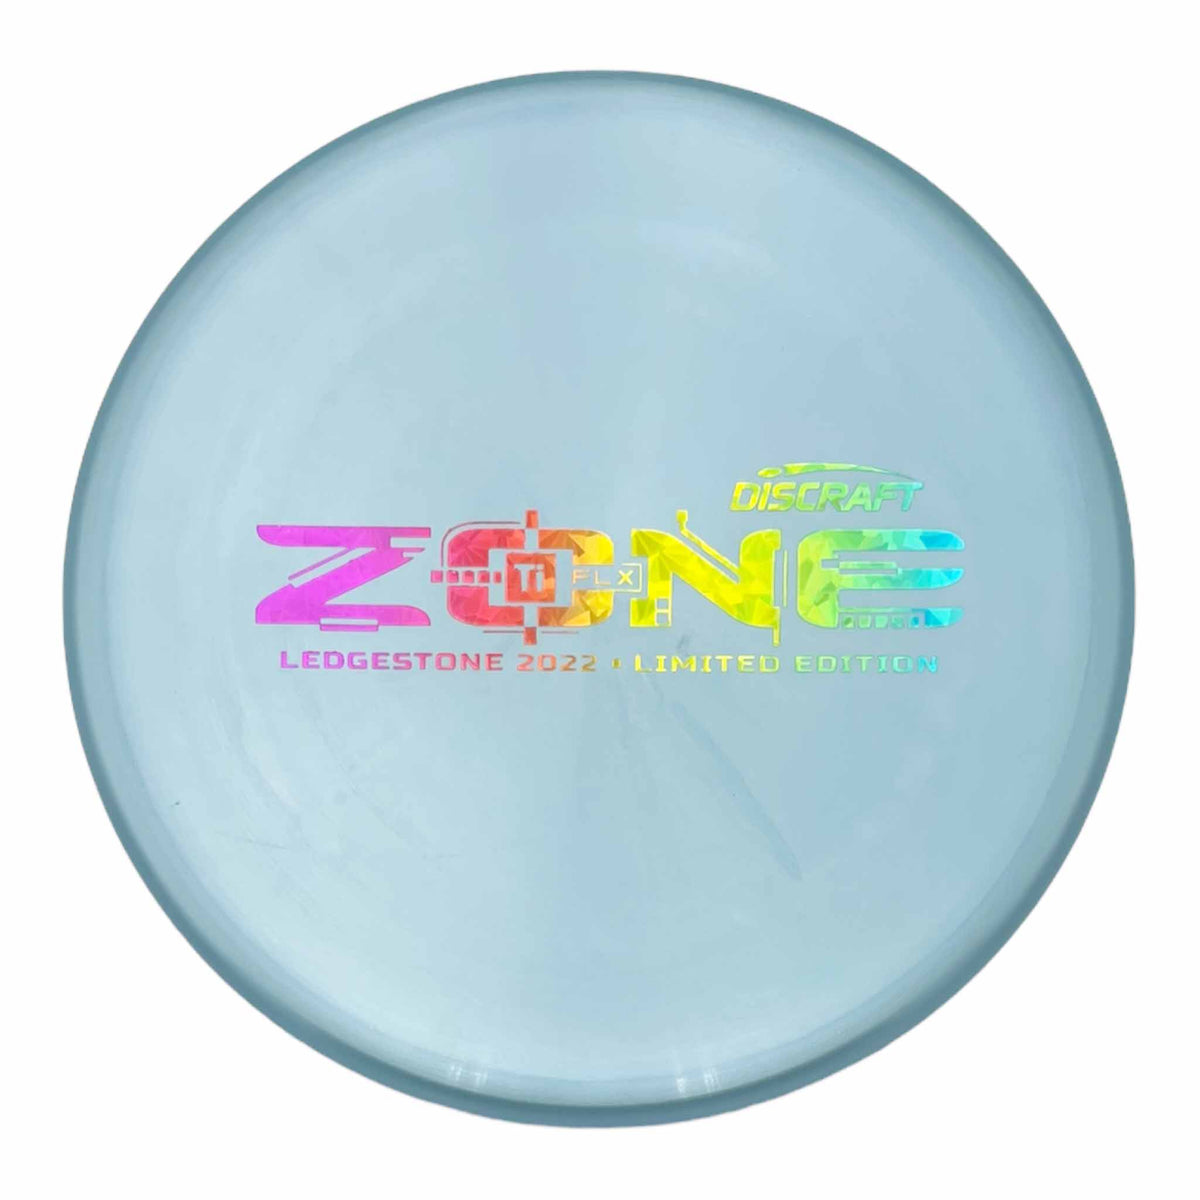 Discraft 2022 Ledgestione Limited Edition Ti FLX Zone putter and approach - Grey / Rainbow